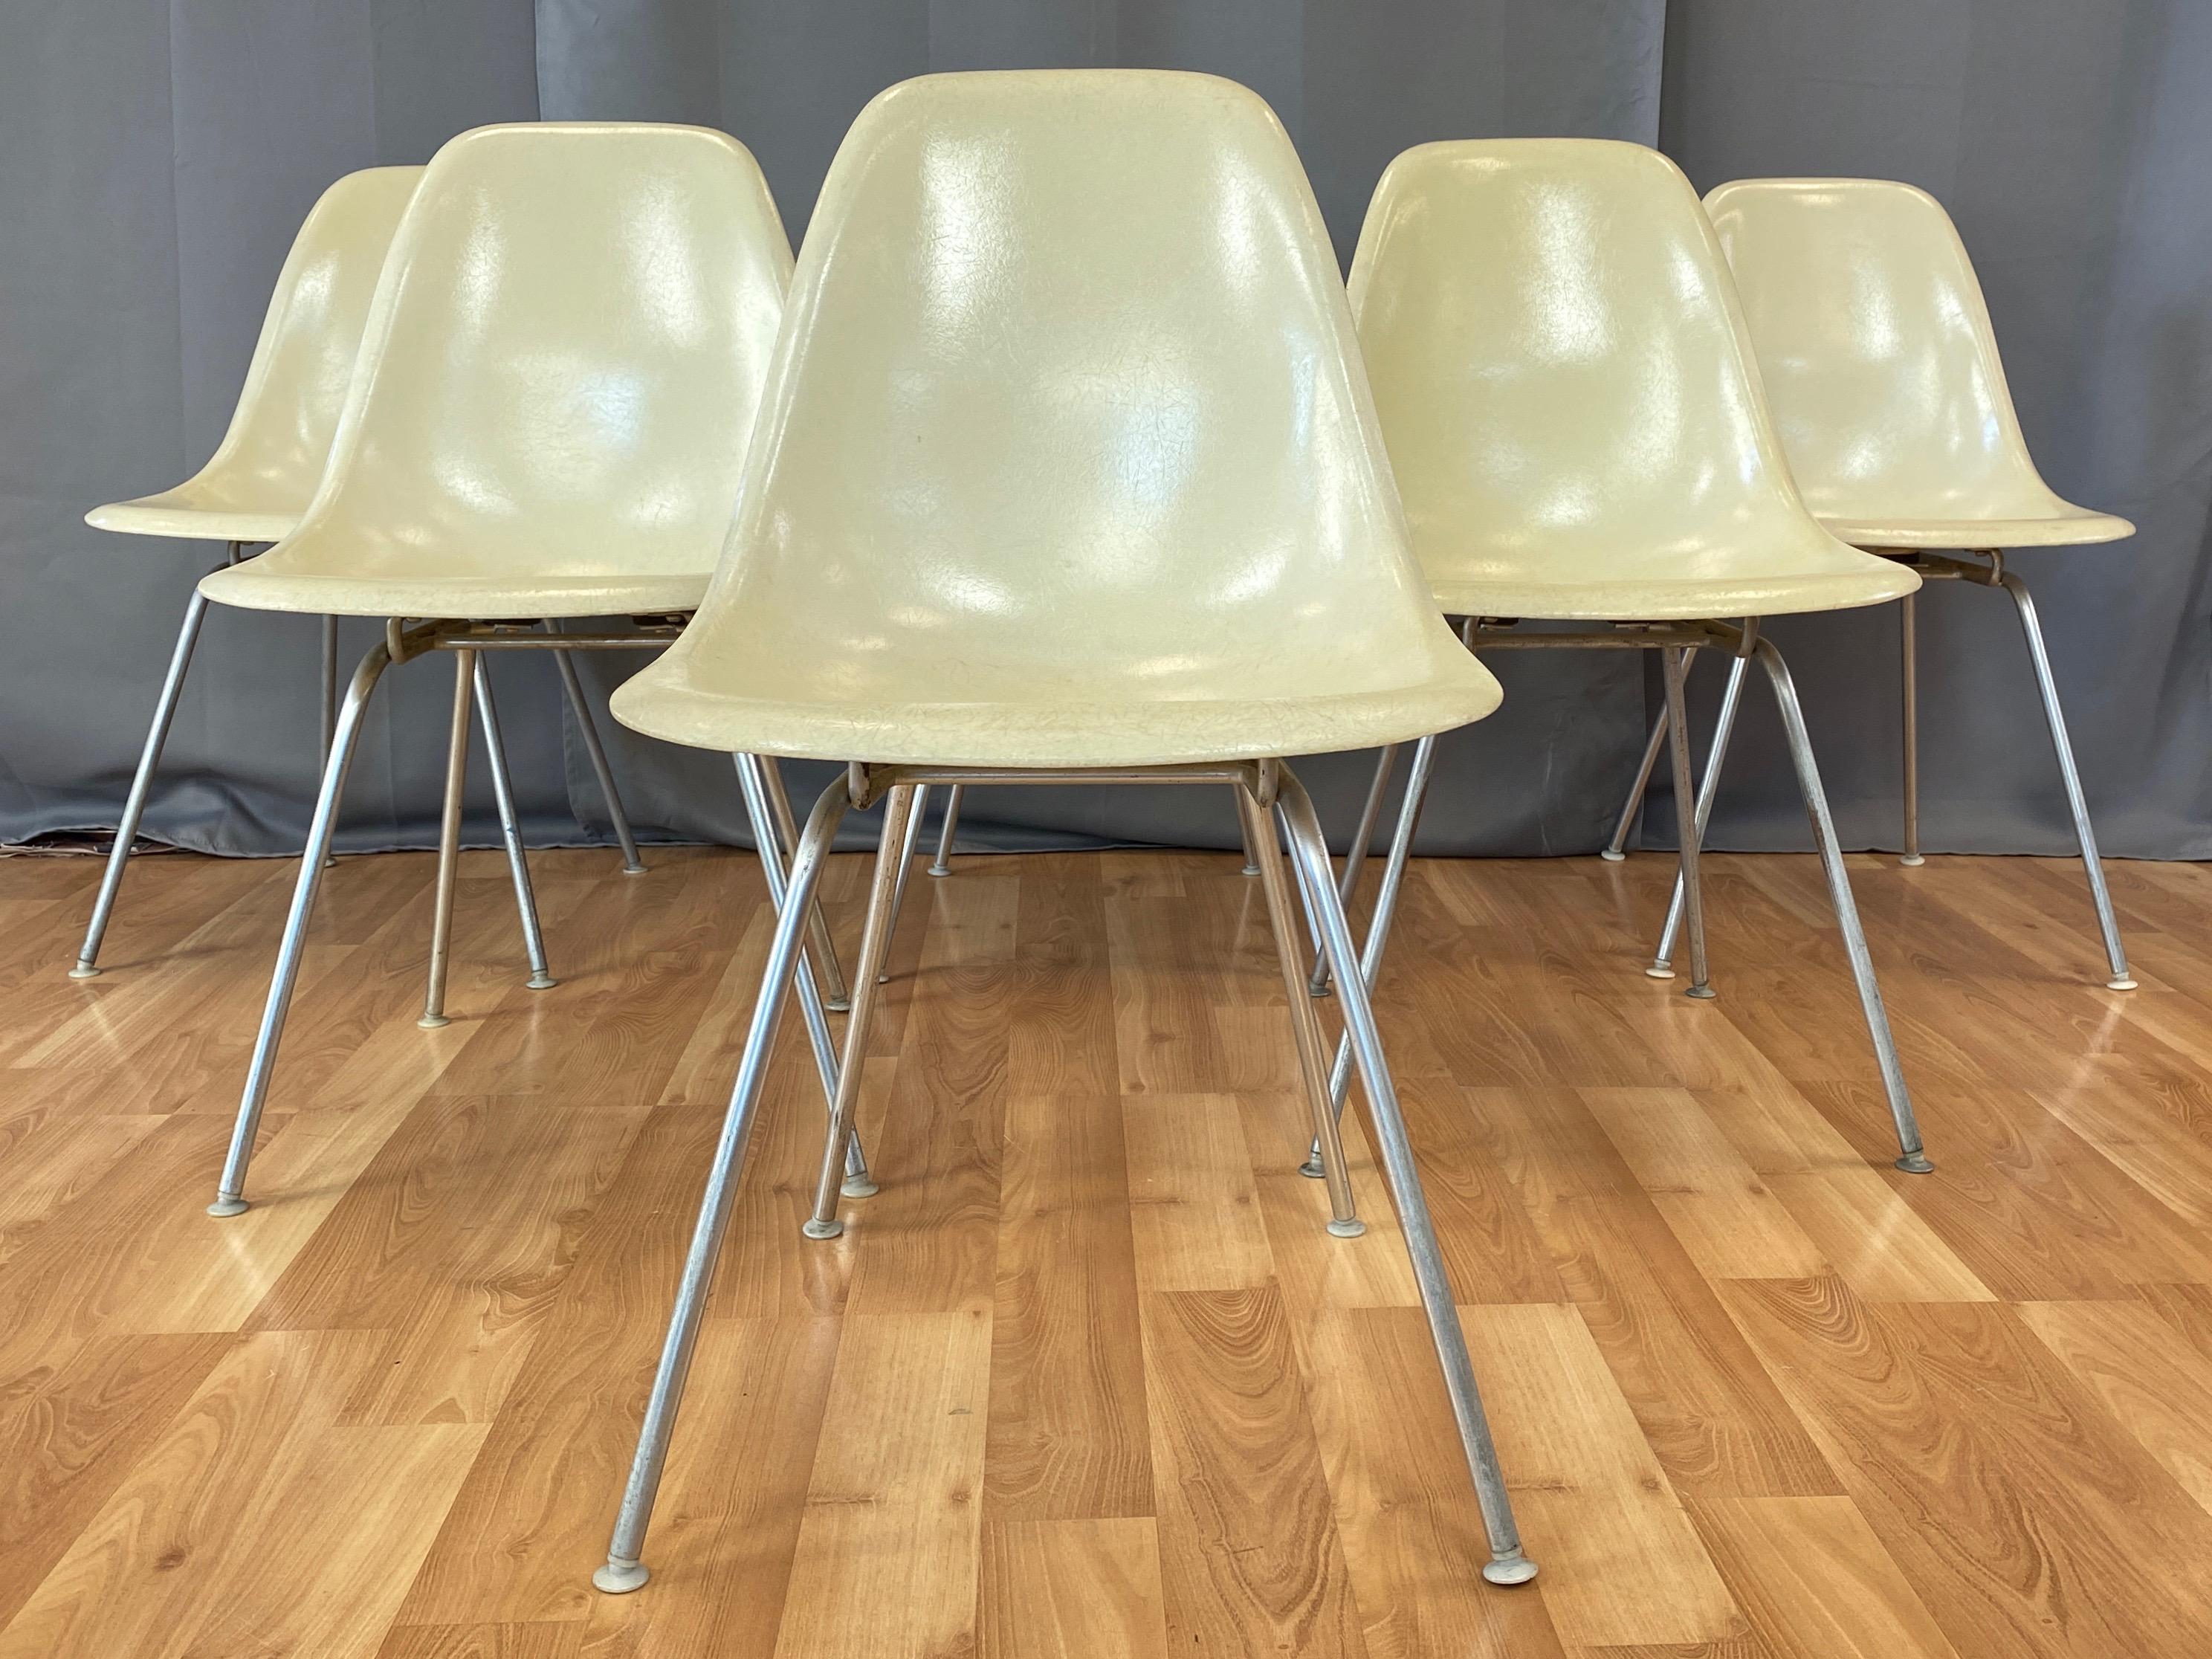 A set of six circa 1959 parchment color fiberglass side chairs with original bases by Charles and Ray Eames for Herman Miller.

Five chairs are DSX on narrow mount ‘H’ bases, and one chair is DSG (Dining Side Guard) on narrow mount ‘H’ base with